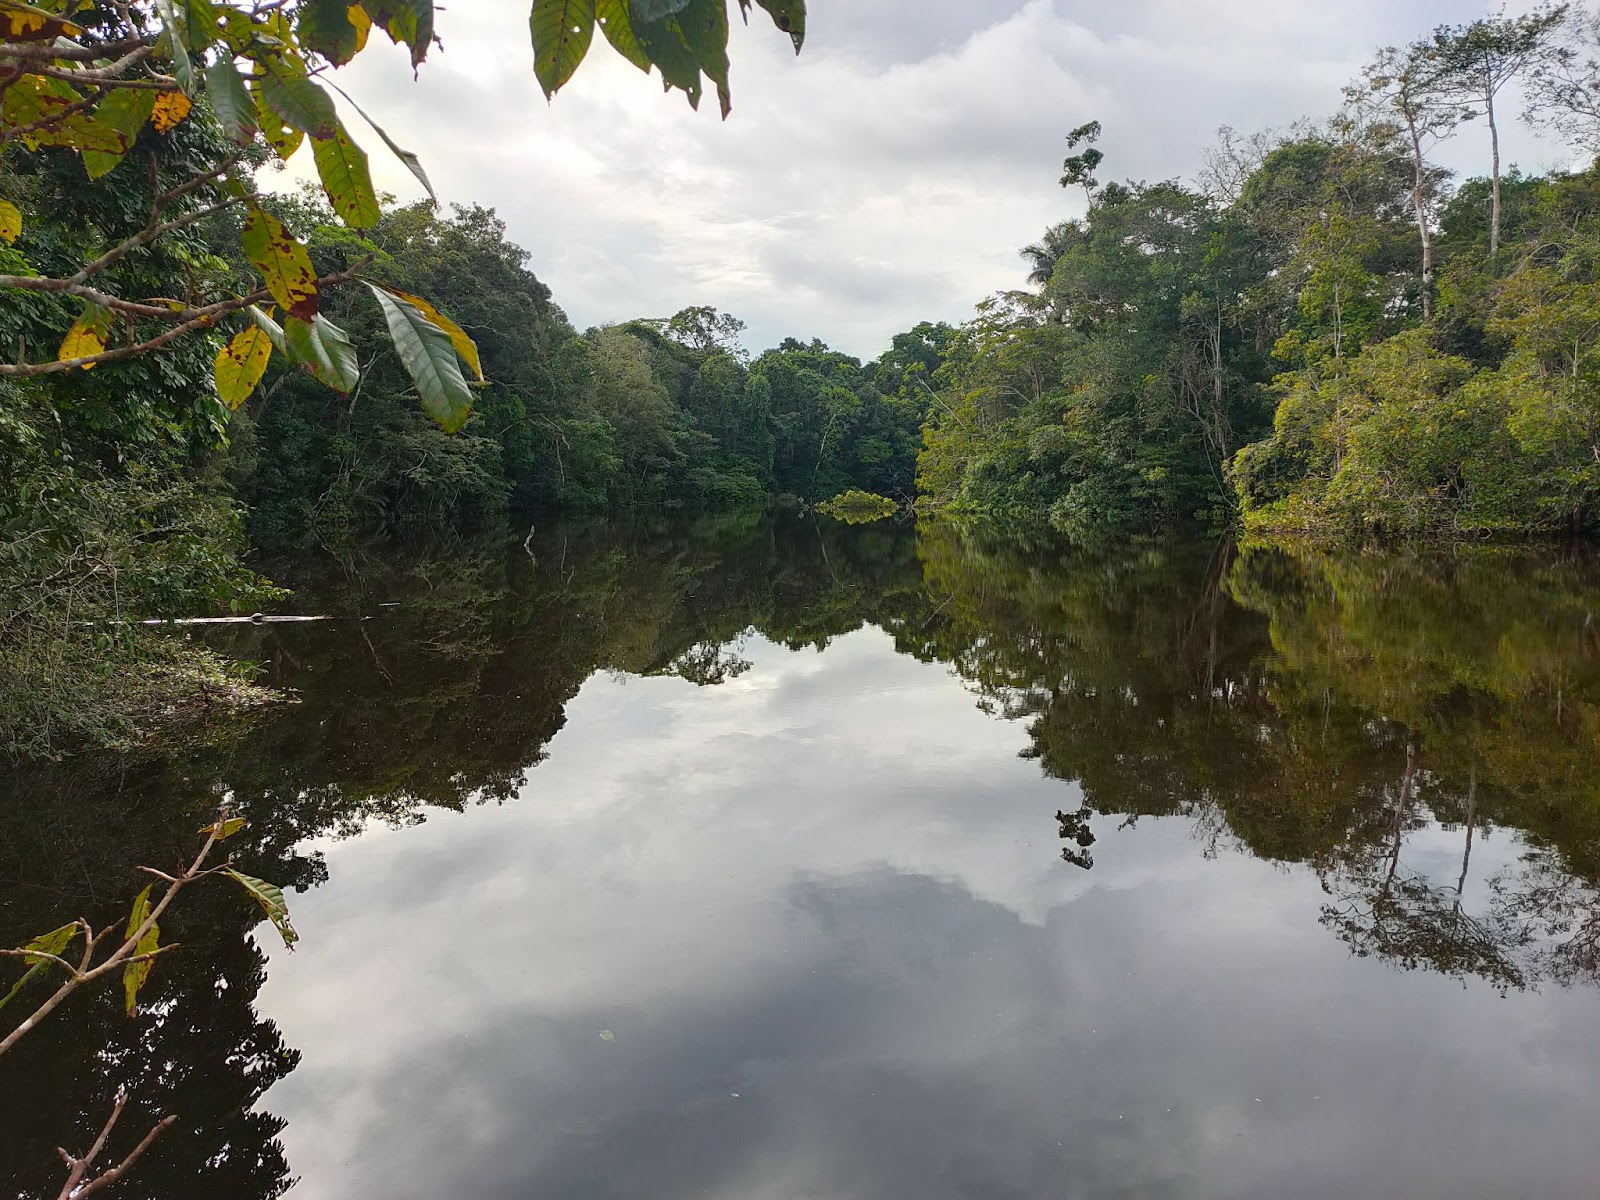 My 4-day experience in the Amazon Jungle | Ecuatraveling